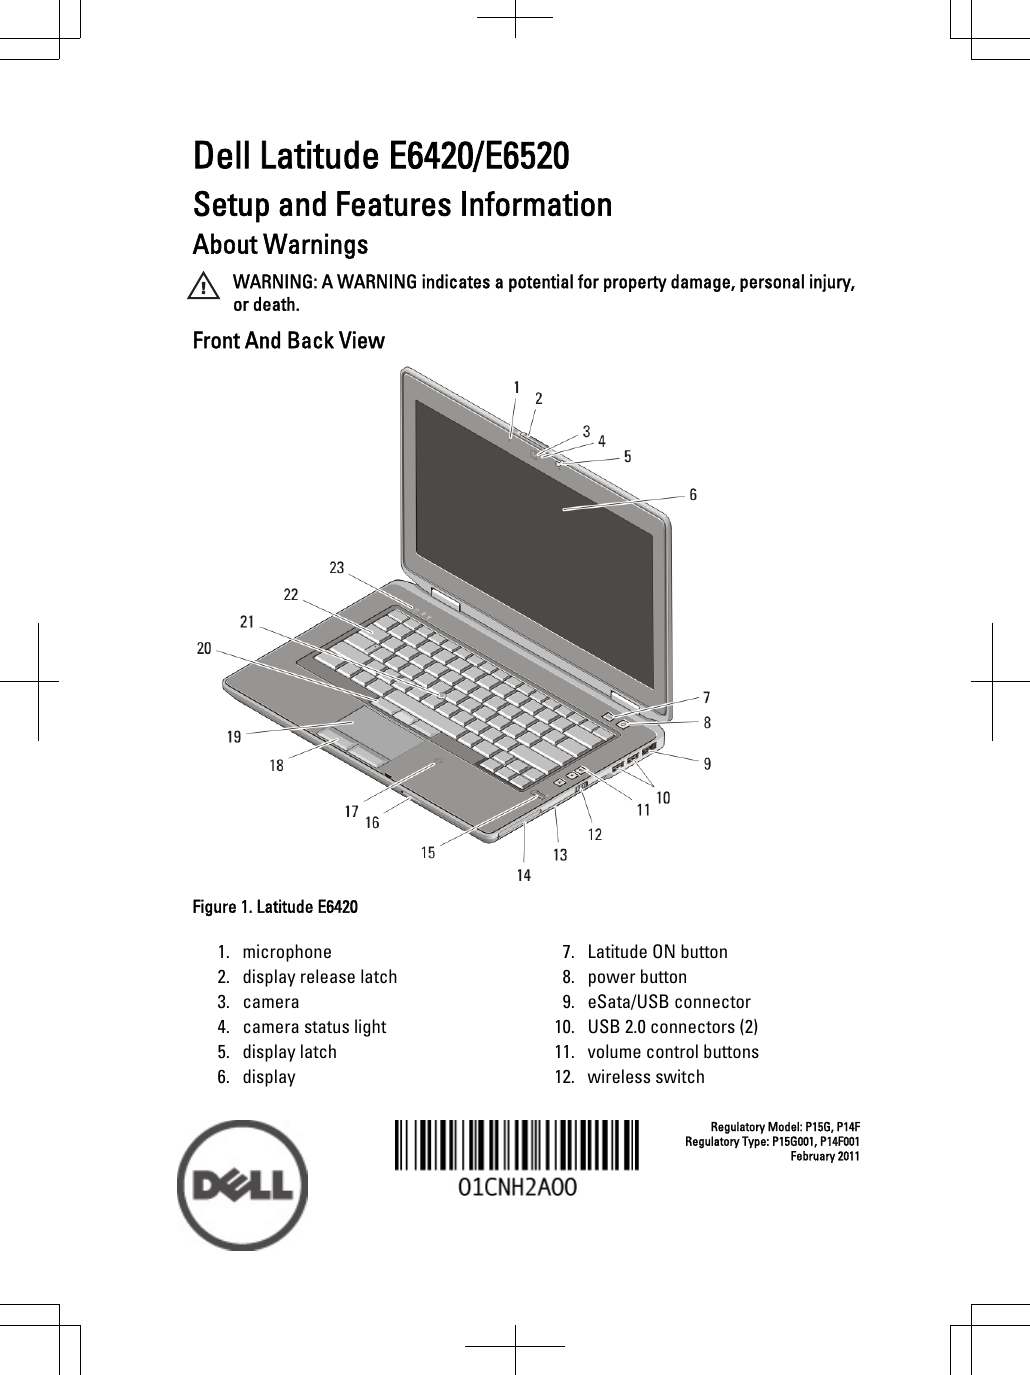 Dell Latitude E6420/E6520Setup and Features InformationAbout WarningsWARNING: A WARNING indicates a potential for property damage, personal injury,or death.Front And Back ViewFigure 1. Latitude E64201. microphone2. display release latch3. camera4. camera status light5. display latch6. display7. Latitude ON button8. power button9. eSata/USB connector10. USB 2.0 connectors (2)11. volume control buttons12. wireless switchRegulatory Model: P15G, P14FRegulatory Type: P15G001, P14F001February 2011